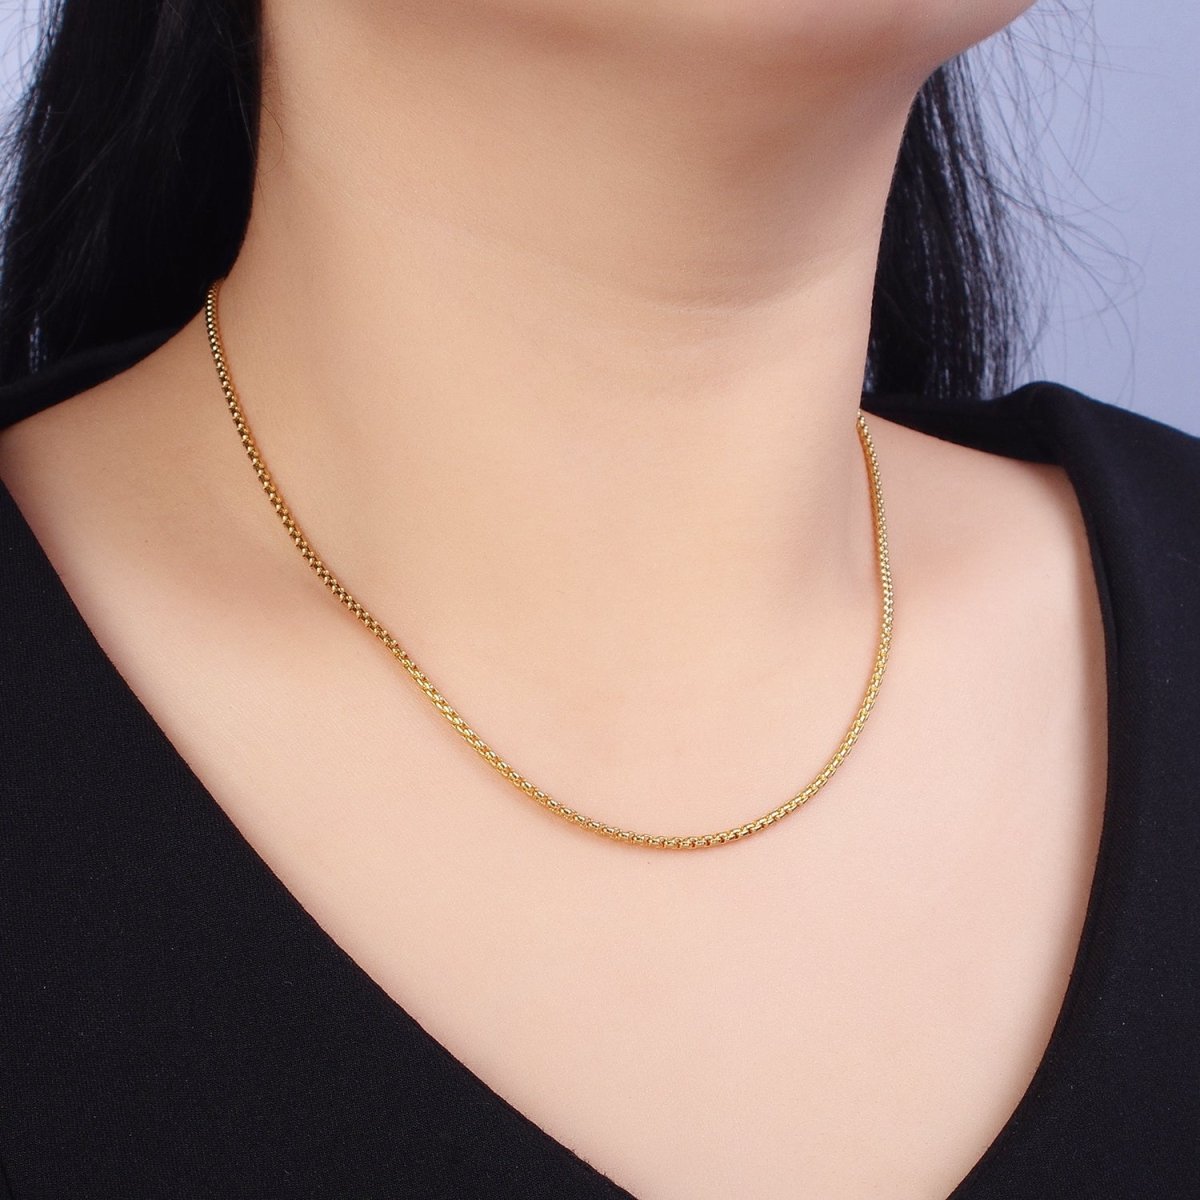 Dainty Gold Cable Rolo Chain Necklace | Waterproof | Unisex Silver Box Chain | Anti Tarnish | STAINLESS STEEL Chain | WA-1710 to WA-1712 Clearance Pricing - DLUXCA